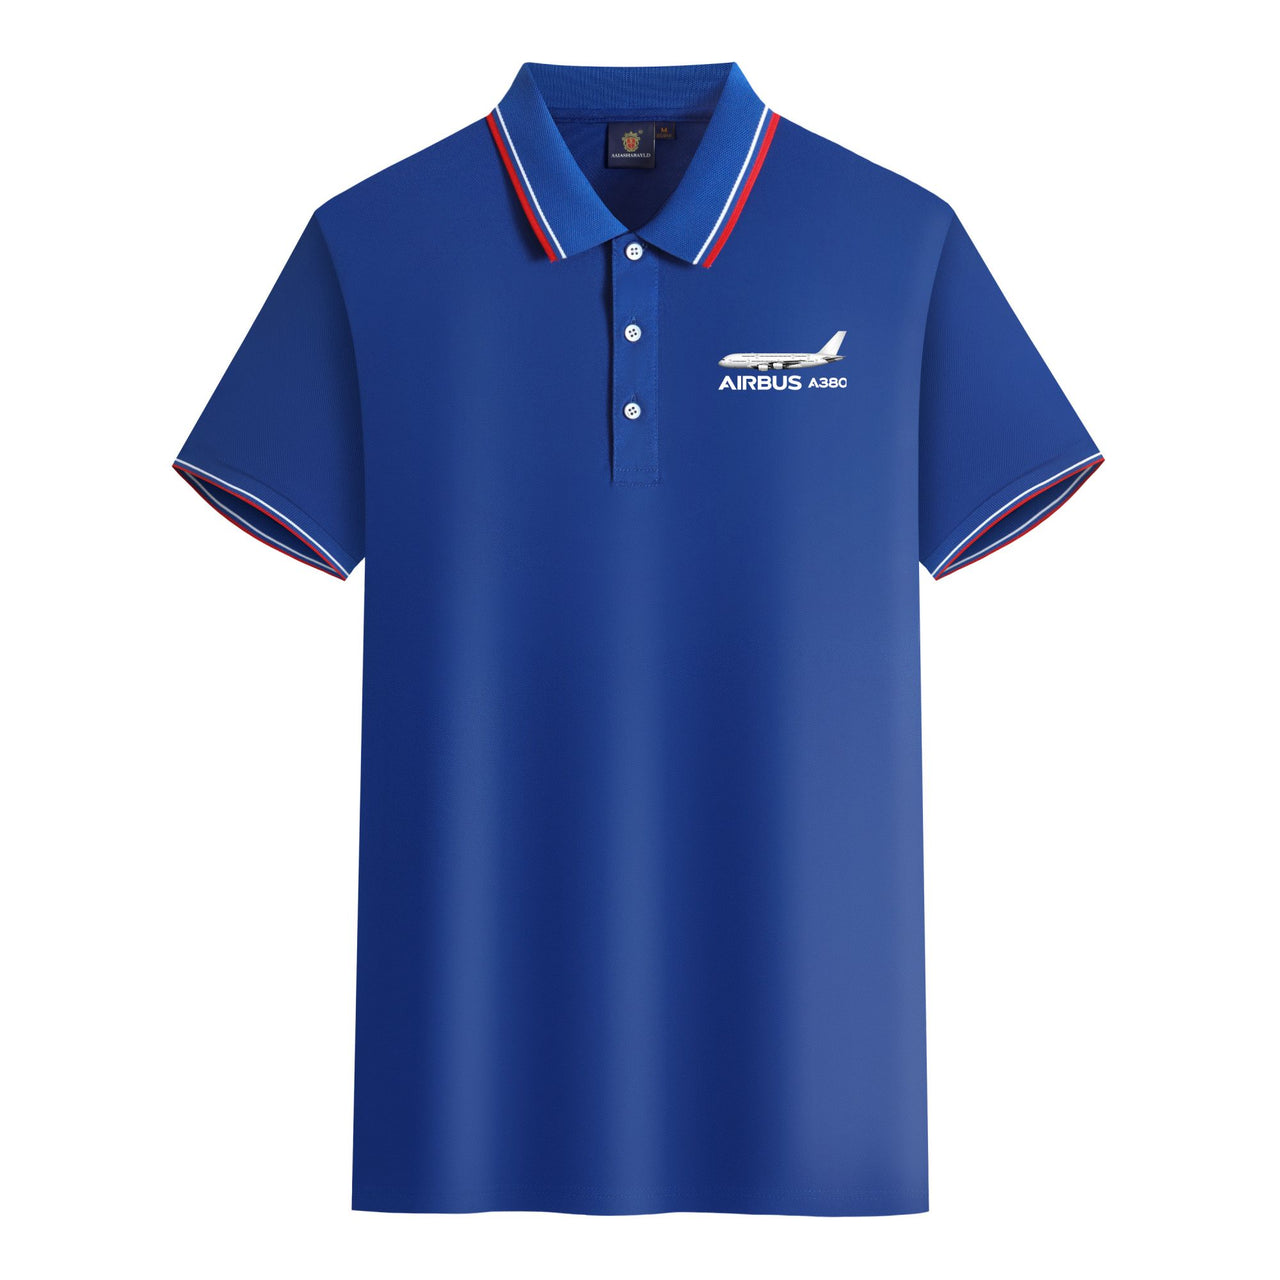 The Airbus A380 Designed Stylish Polo T-Shirts